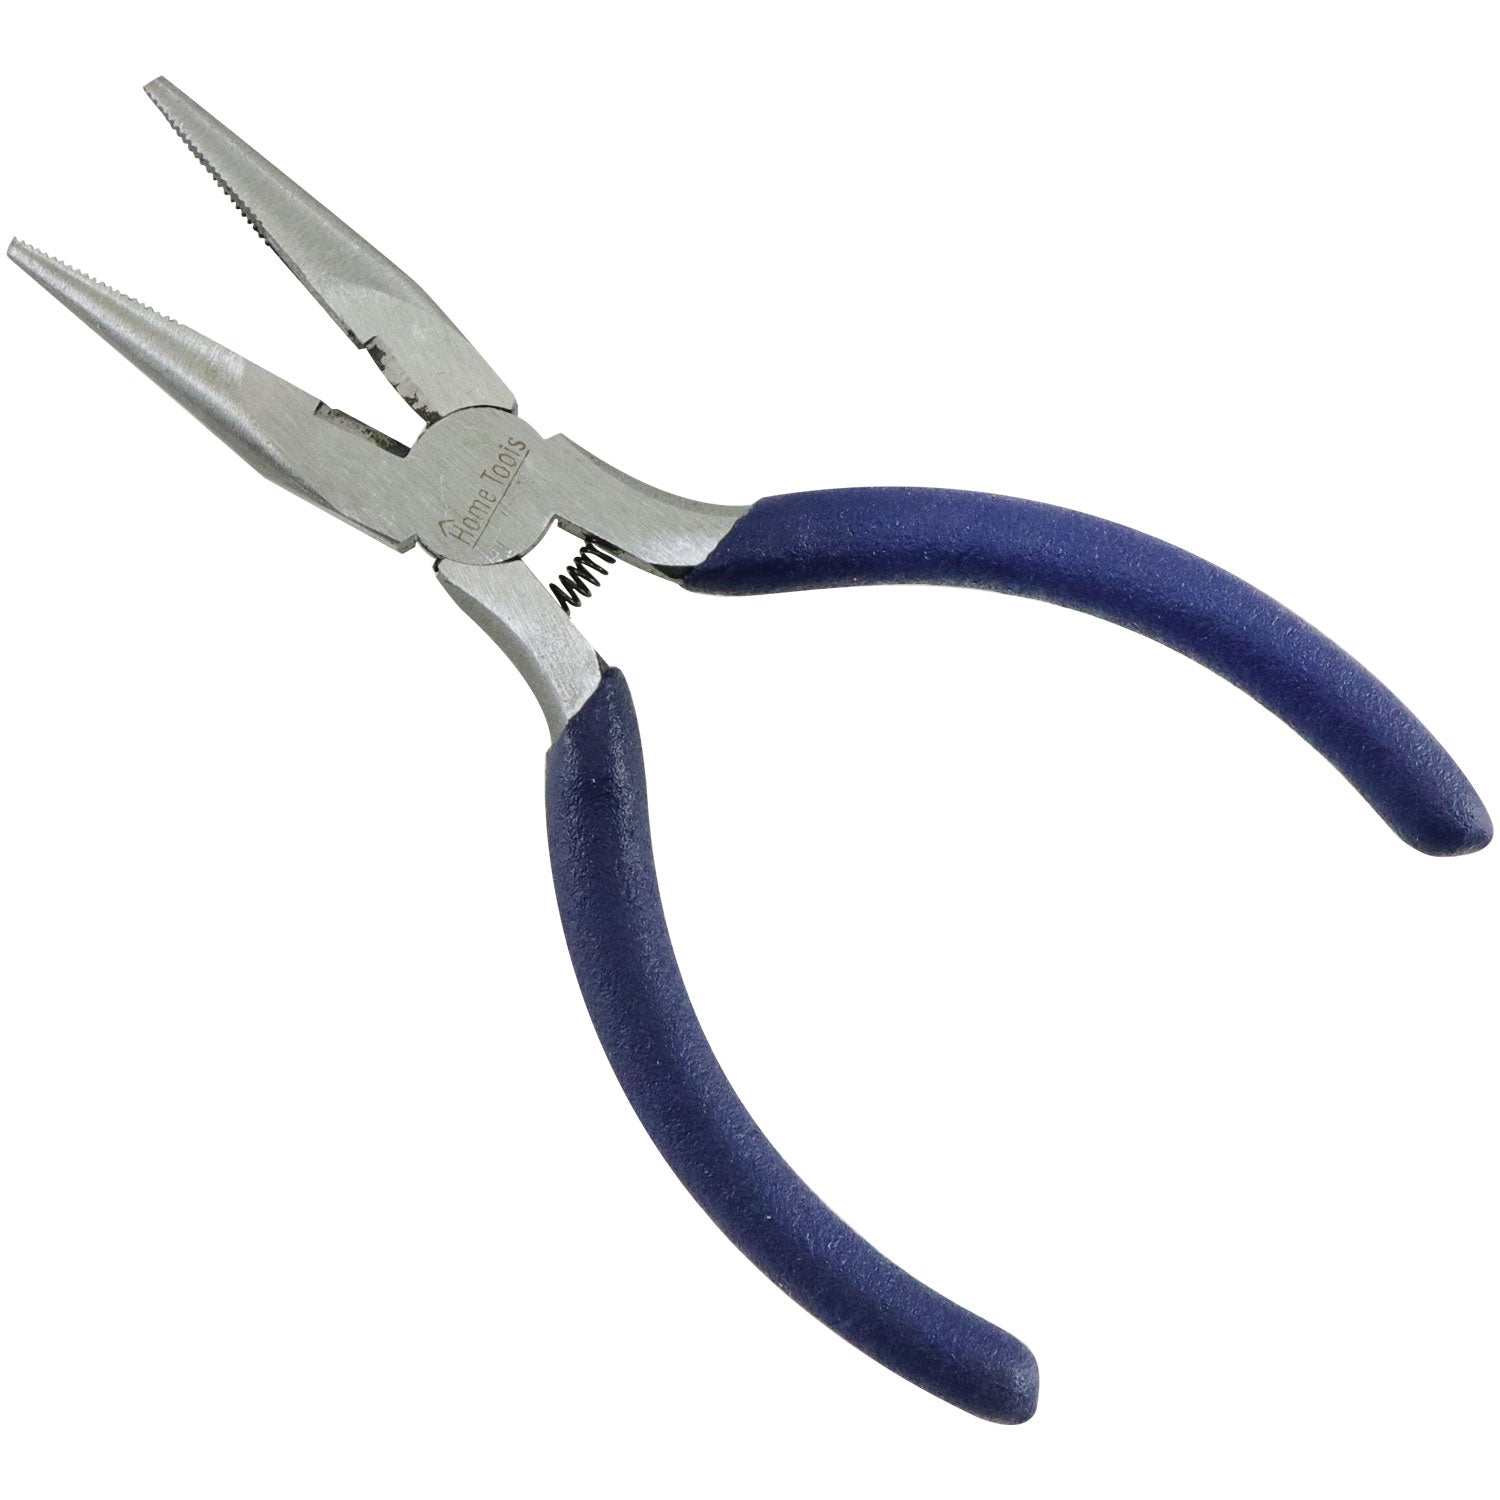 Buy JLS Small Round Nose Pliers Online at $11.5 - JL Smith & Co